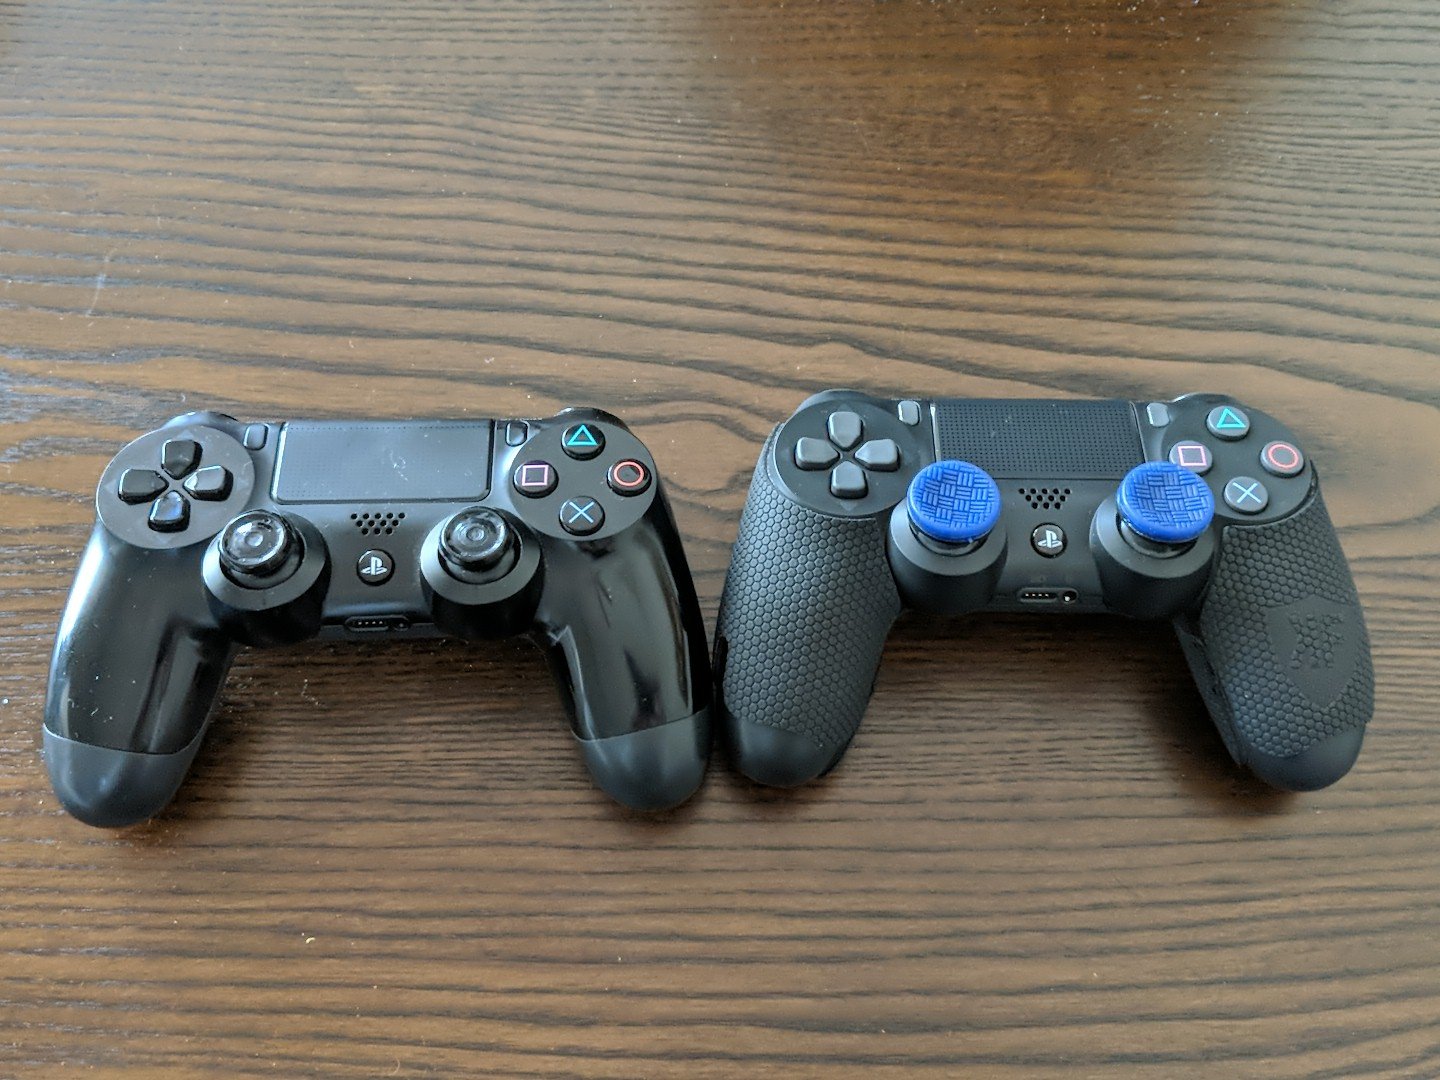 overgive lys pære te Thick44 on Twitter: "Finally got a new PS4 controller. My old one looks  like farrets gnawed the rubber off the sticks. Thanks @KontrolFreek for  kitting it out https://t.co/qy0N7MHtCQ" / X